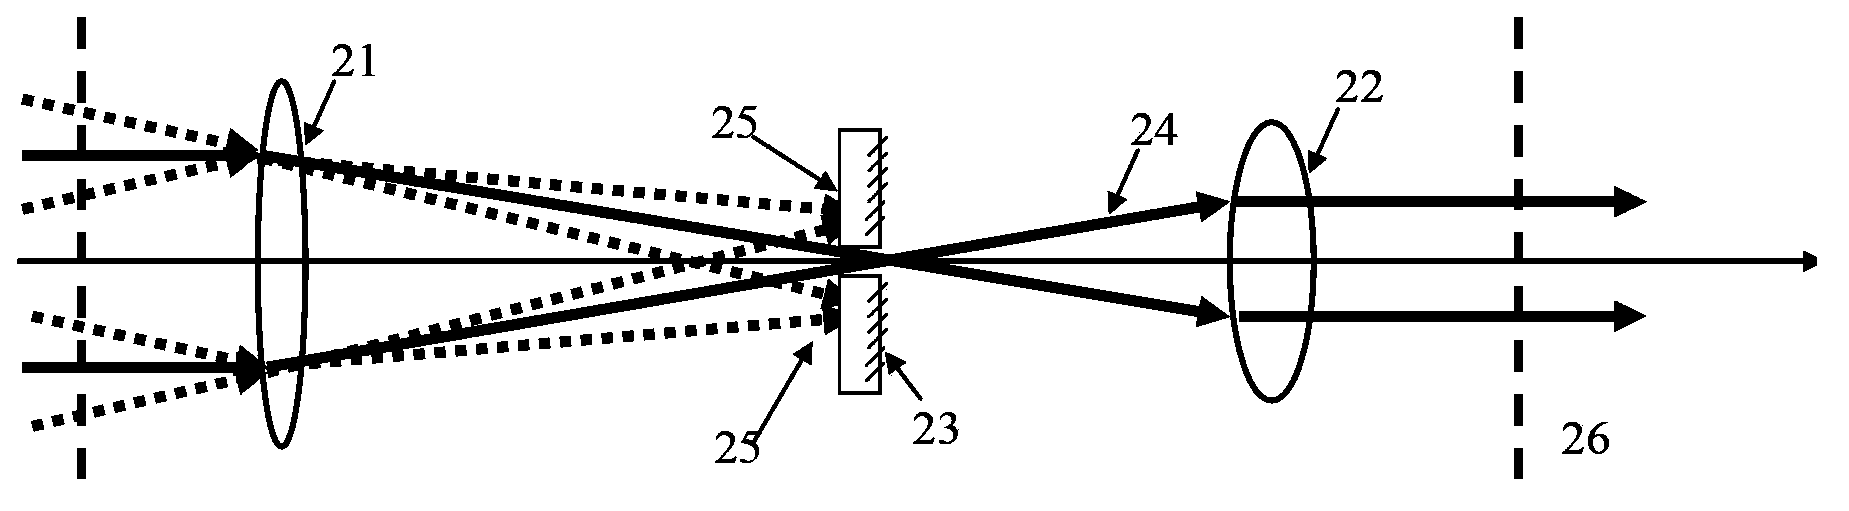 High-power laser image transfer low-pass spatial filter device